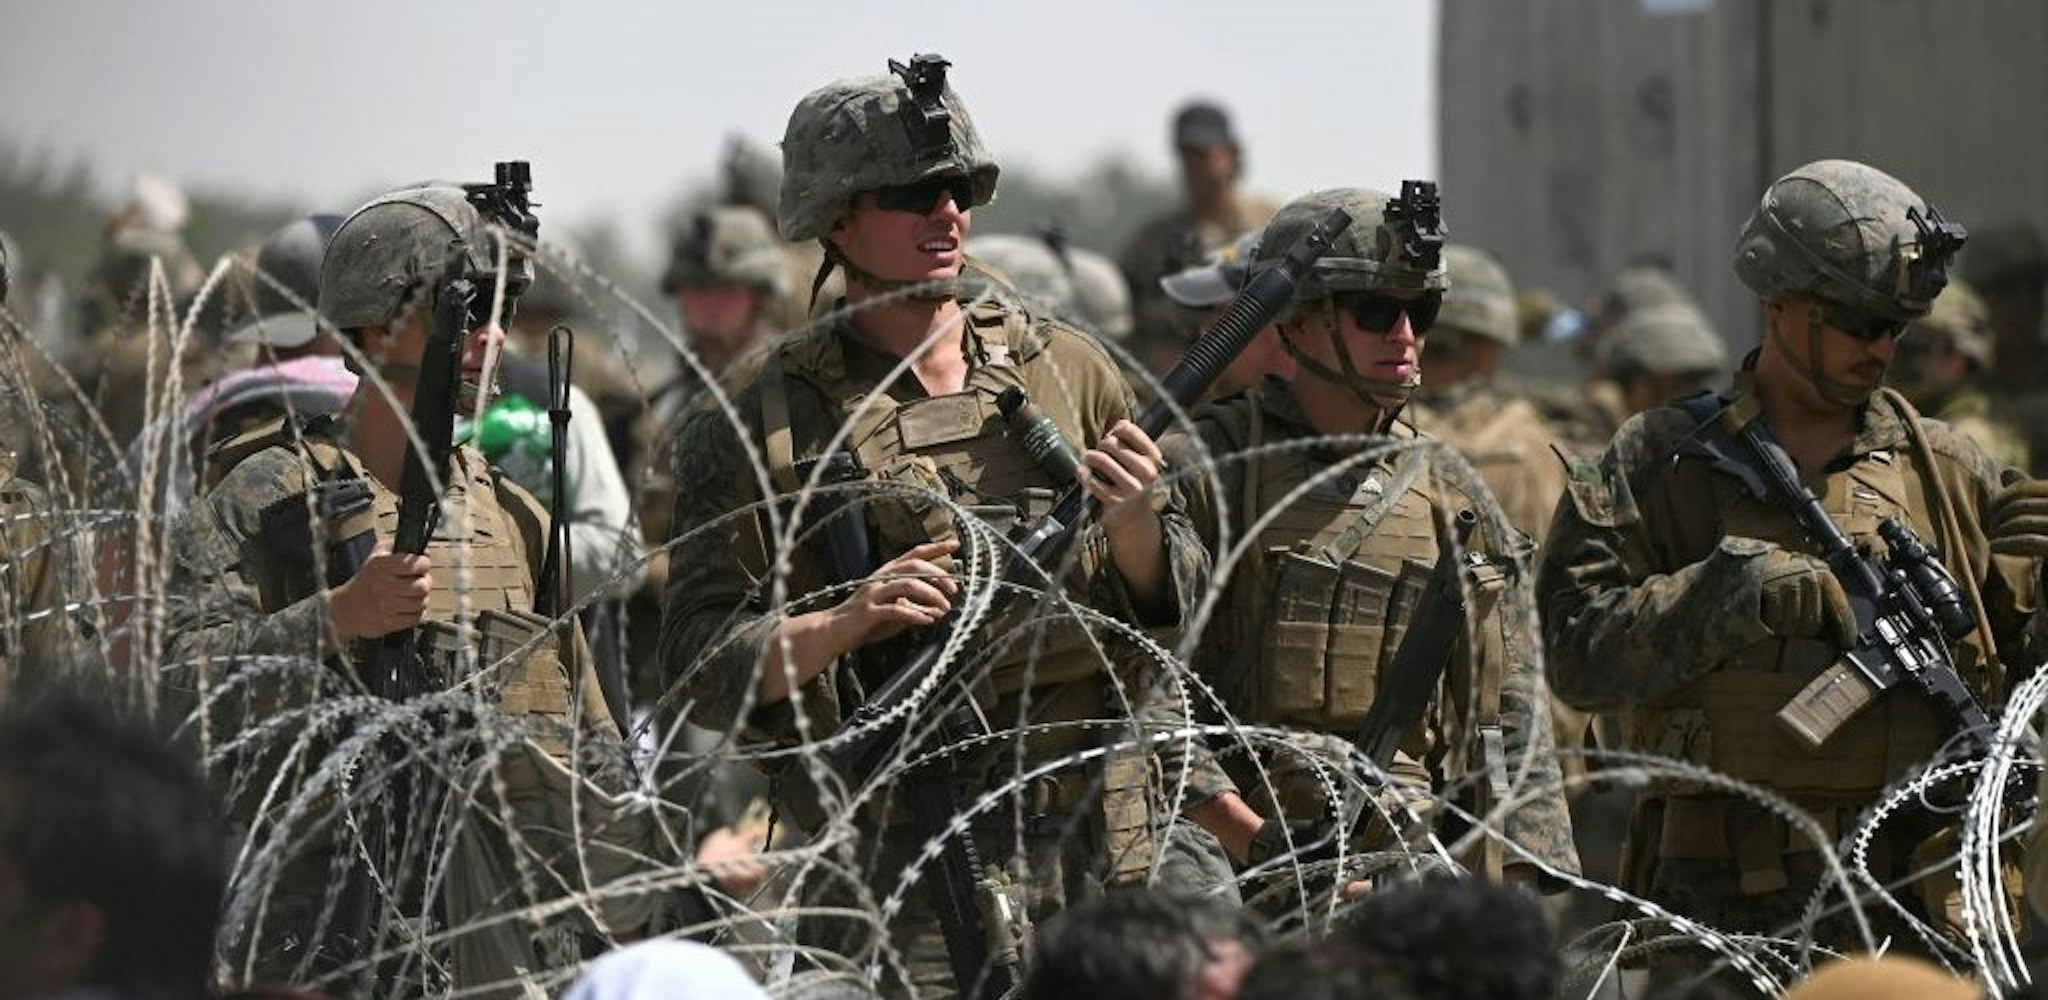 TOPSHOT - US soldiers stand guard behind barbed wire as Afghans sit on a roadside near the military part of the airport in Kabul on August 20, 2021, hoping to flee from the country after the Taliban's military takeover of Afghanistan. (Photo by Wakil KOHSAR / AFP) (Photo by